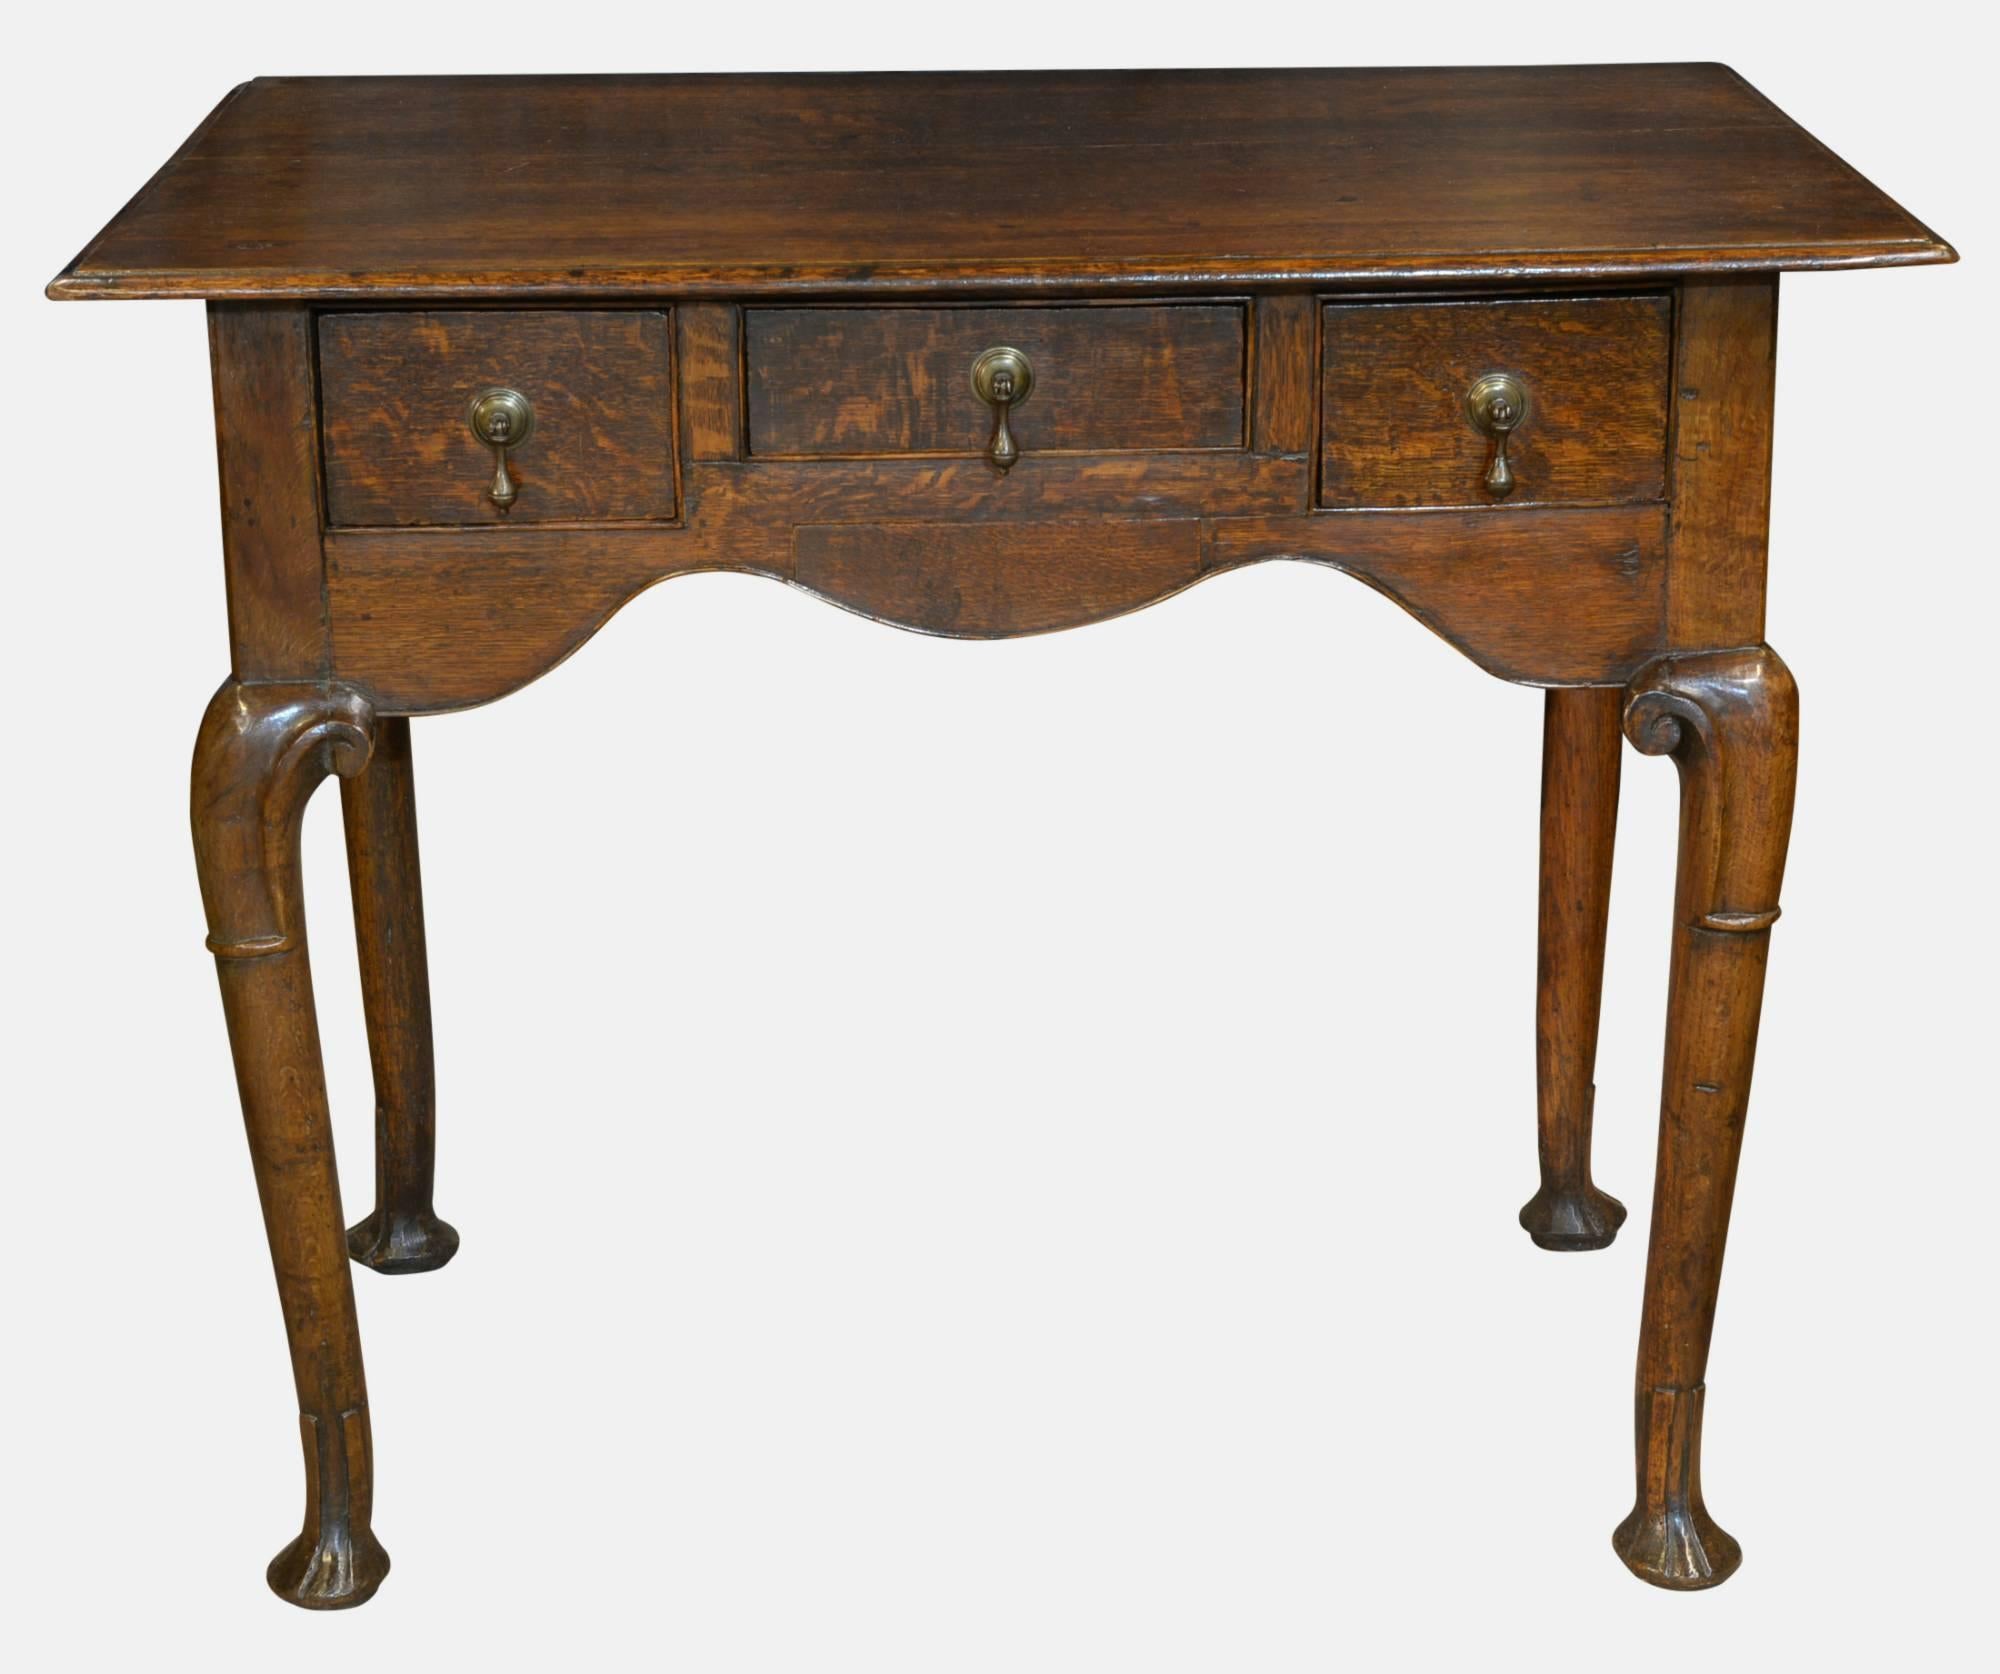 An 18th century, oak lowboy of three drawers. On turned legs with lappet feet,

circa 1770.